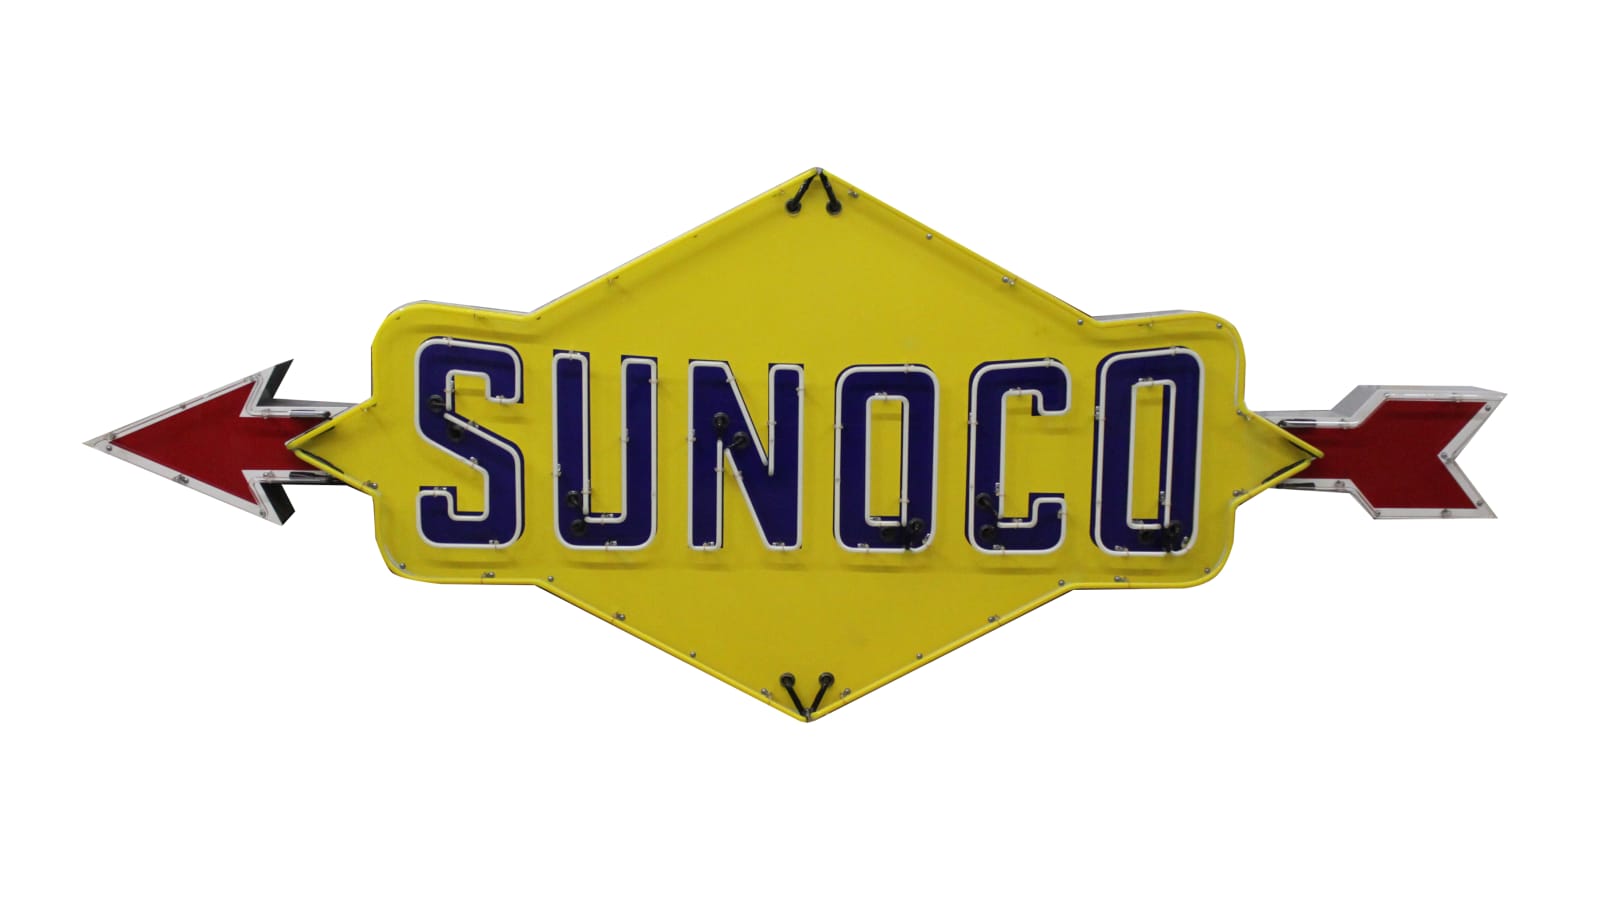 Sunoco Neon Sign at Indy 2017 as F150 - Mecum Auctions